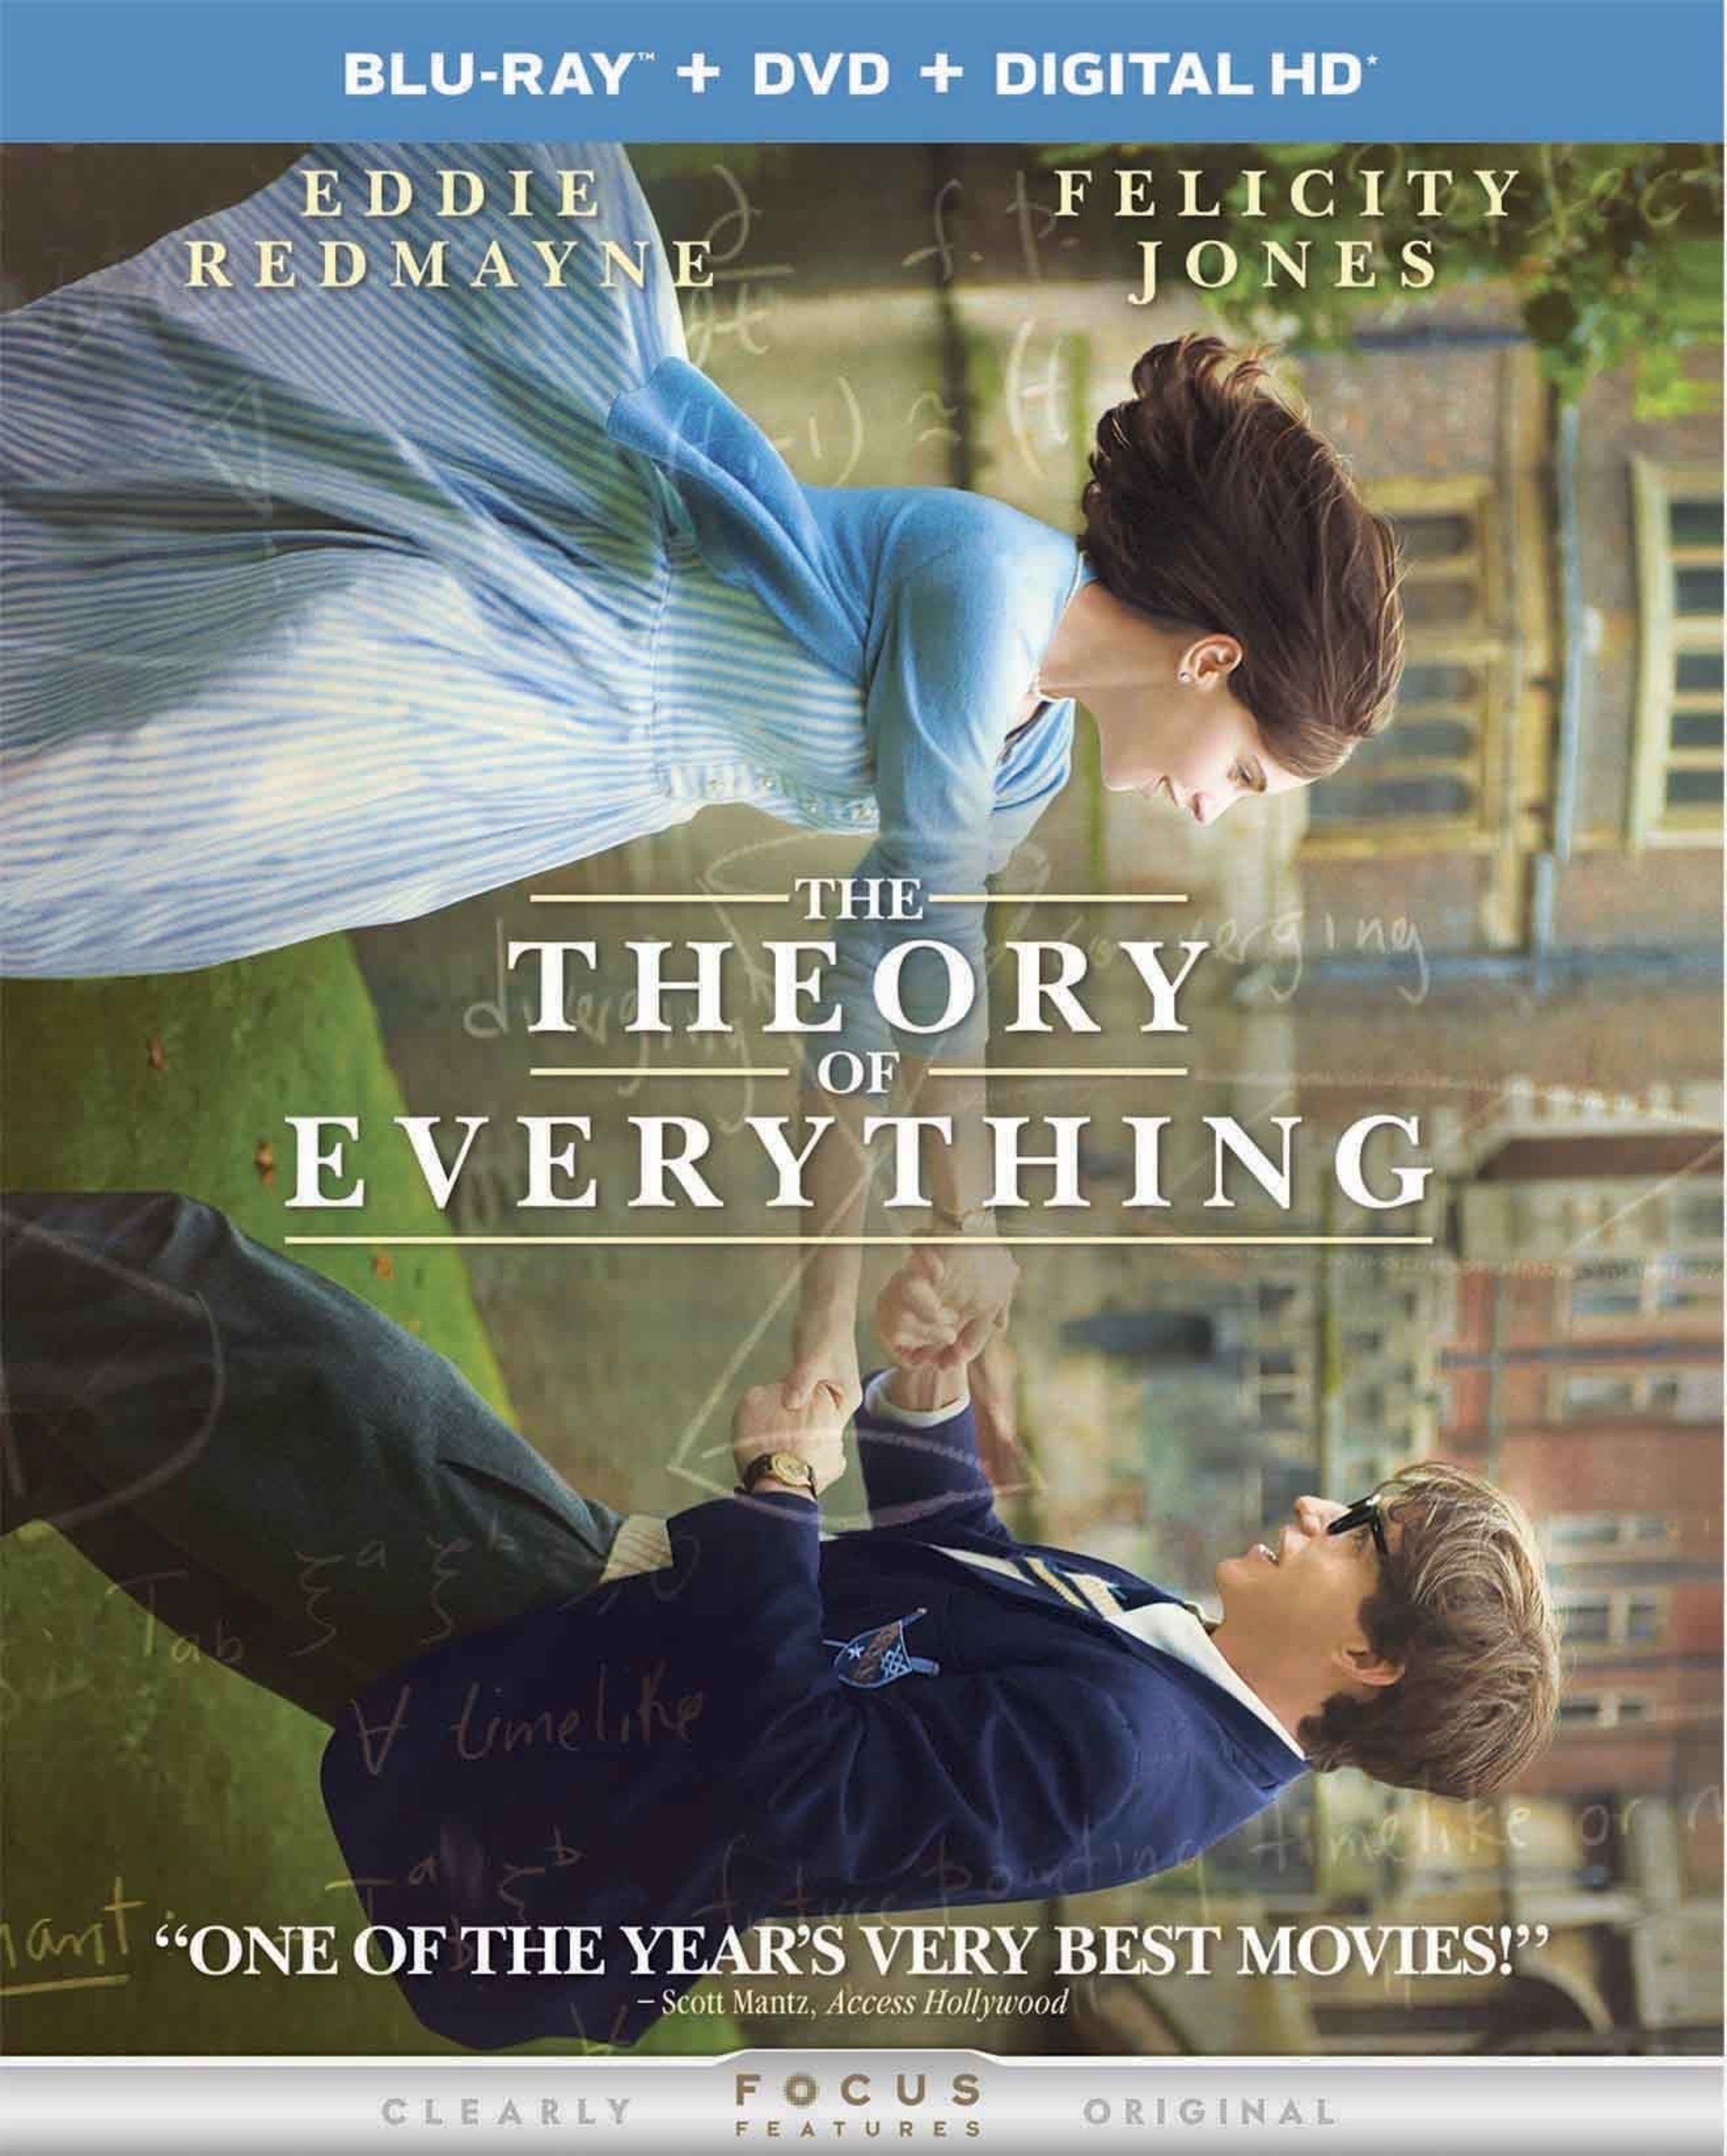 The Theory of Everything is available on Blu-ray, DVD and Digital HD February 17 from Universal Pictures Home Entertainment.